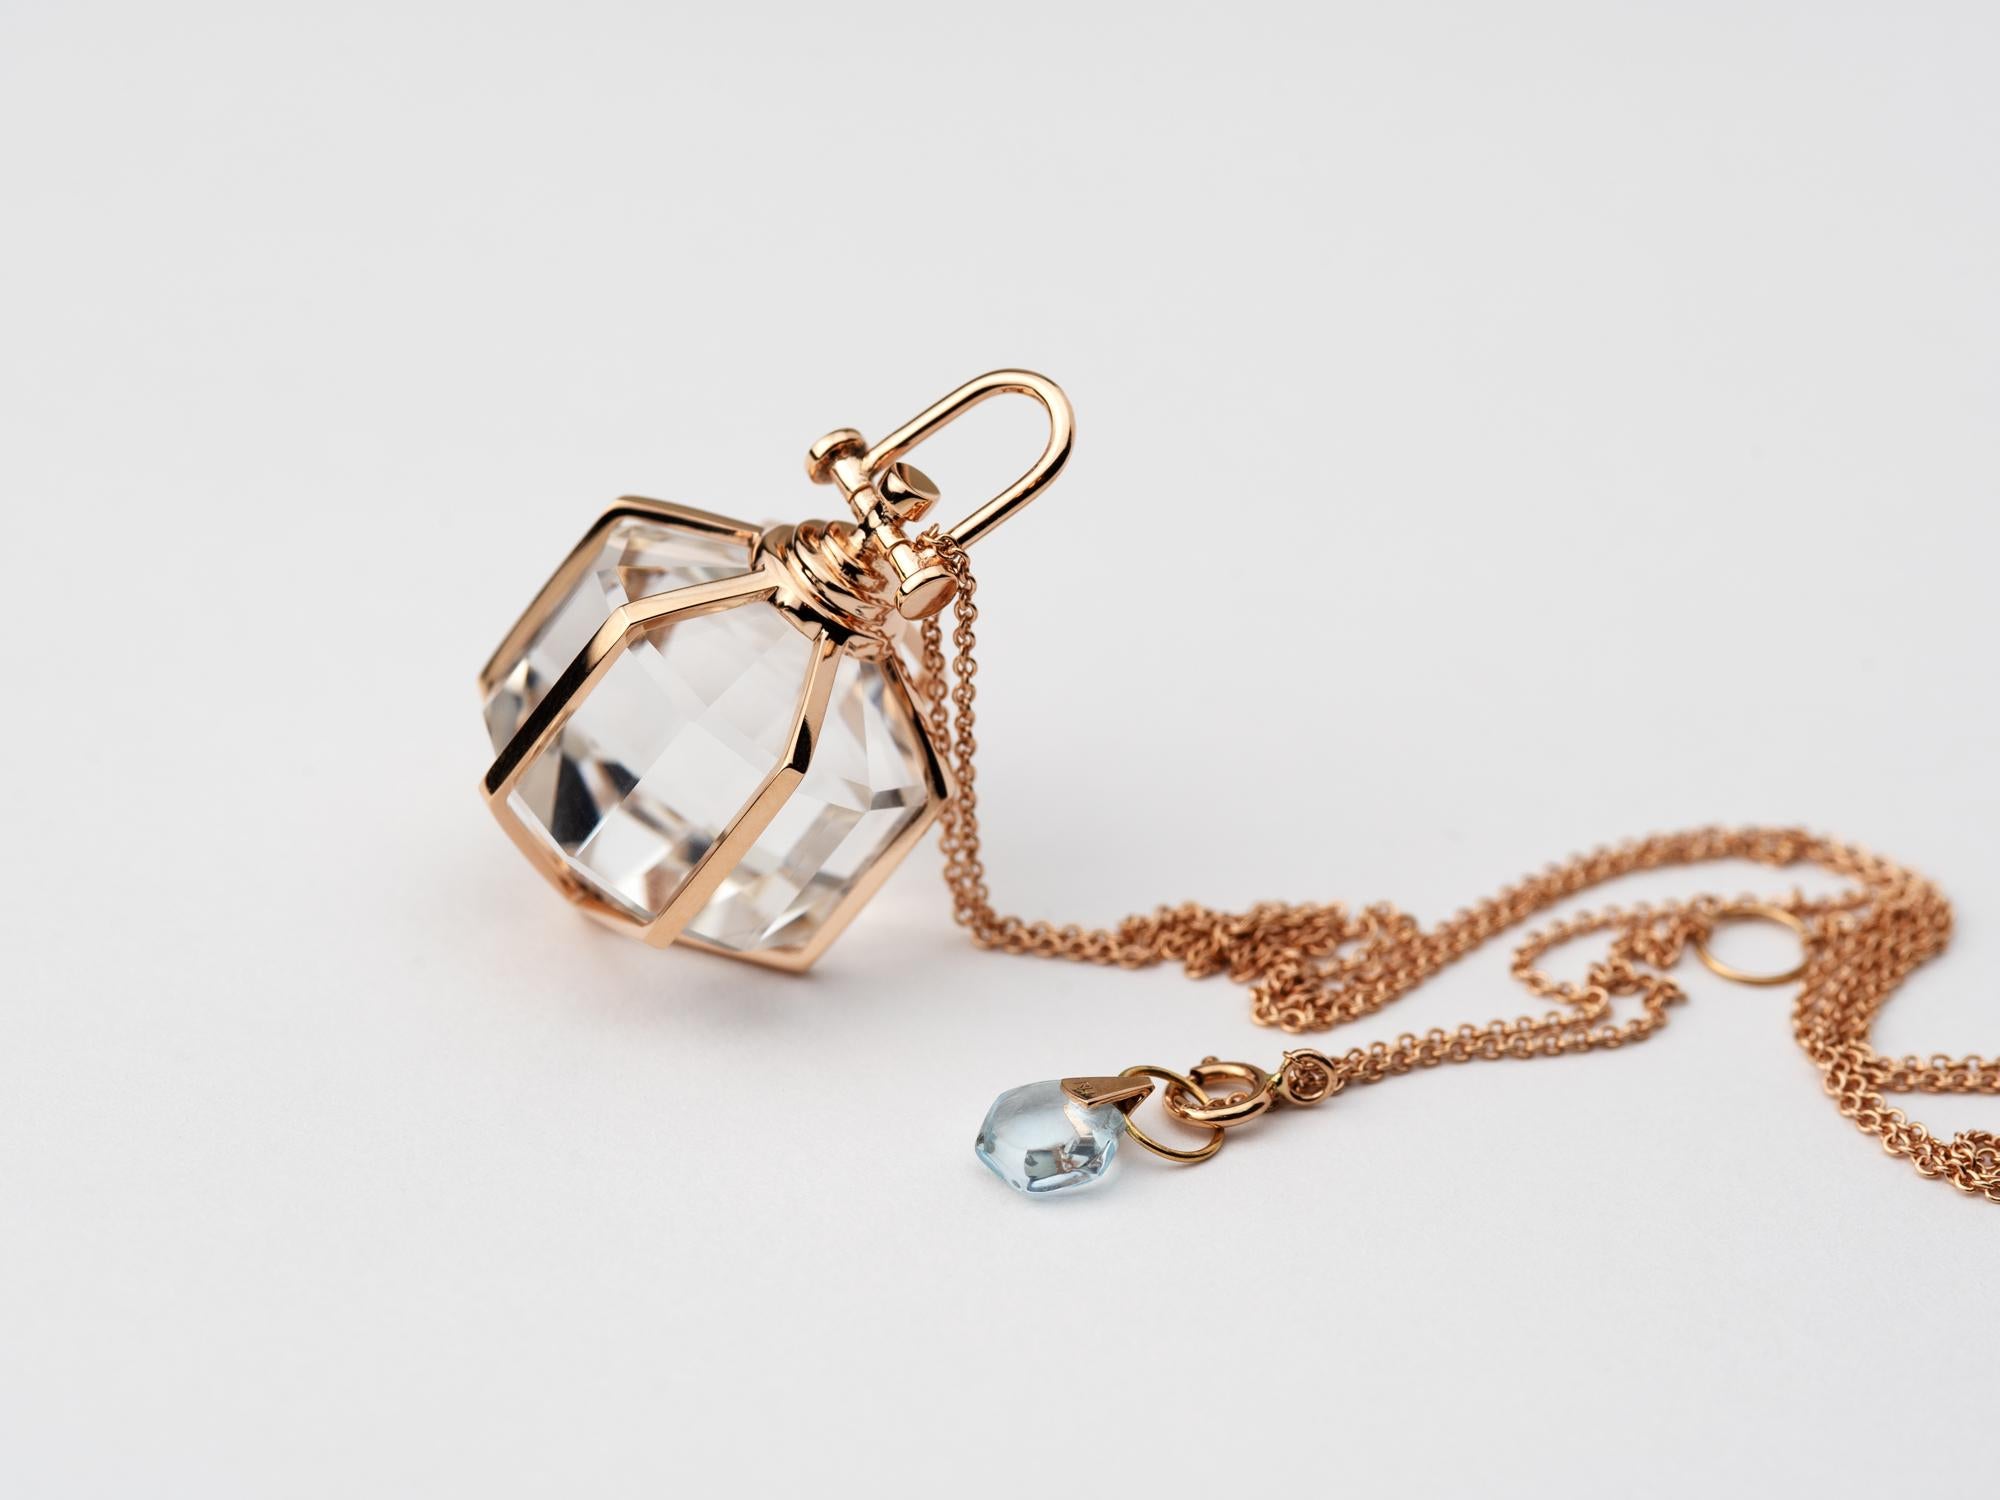 Rebecca Li designs Mindfulness. 
This necklace is from her Six Senses Talisman Collection. It's inspired by sacred geometry. The designer wants us to always remember that we have the ability to control uncontrollable by simply control what we can,